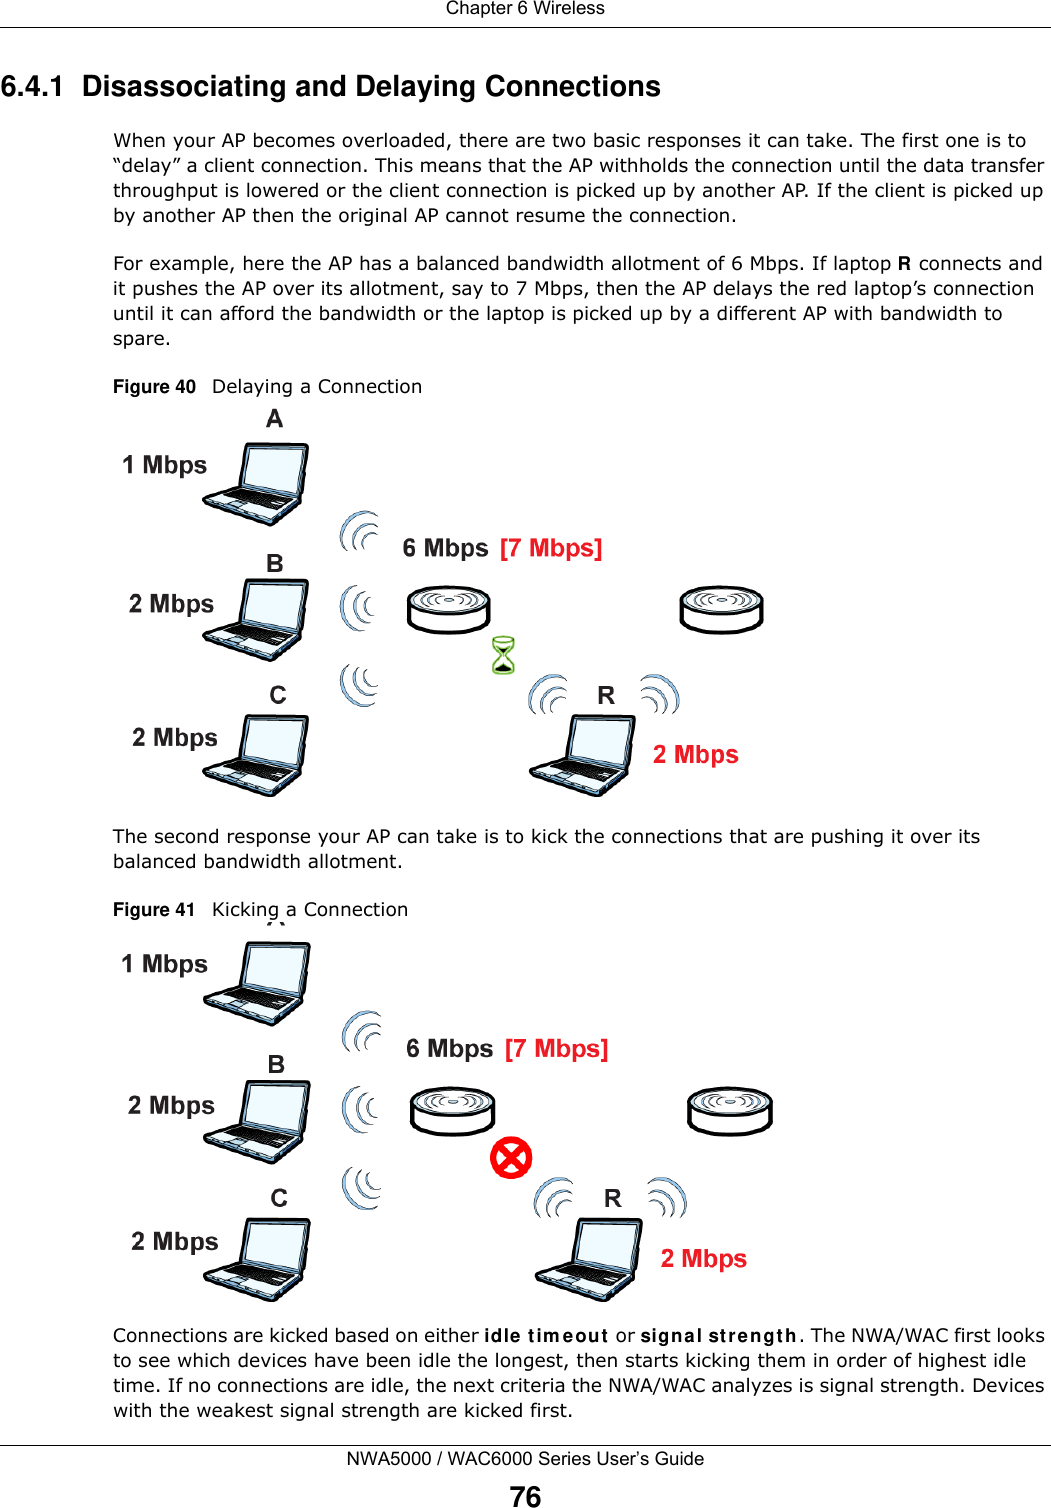 Chapter 6 WirelessNWA5000 / WAC6000 Series User’s Guide766.4.1  Disassociating and Delaying ConnectionsWhen your AP becomes overloaded, there are two basic responses it can take. The first one is to “delay” a client connection. This means that the AP withholds the connection until the data transfer throughput is lowered or the client connection is picked up by another AP. If the client is picked up by another AP then the original AP cannot resume the connection.For example, here the AP has a balanced bandwidth allotment of 6 Mbps. If laptop R connects and it pushes the AP over its allotment, say to 7 Mbps, then the AP delays the red laptop’s connection until it can afford the bandwidth or the laptop is picked up by a different AP with bandwidth to spare.Figure 40   Delaying a ConnectionThe second response your AP can take is to kick the connections that are pushing it over its balanced bandwidth allotment.Figure 41   Kicking a ConnectionConnections are kicked based on either idle tim eout  or signal st ren gth . The NWA/WAC first looks to see which devices have been idle the longest, then starts kicking them in order of highest idle time. If no connections are idle, the next criteria the NWA/WAC analyzes is signal strength. Devices with the weakest signal strength are kicked first.